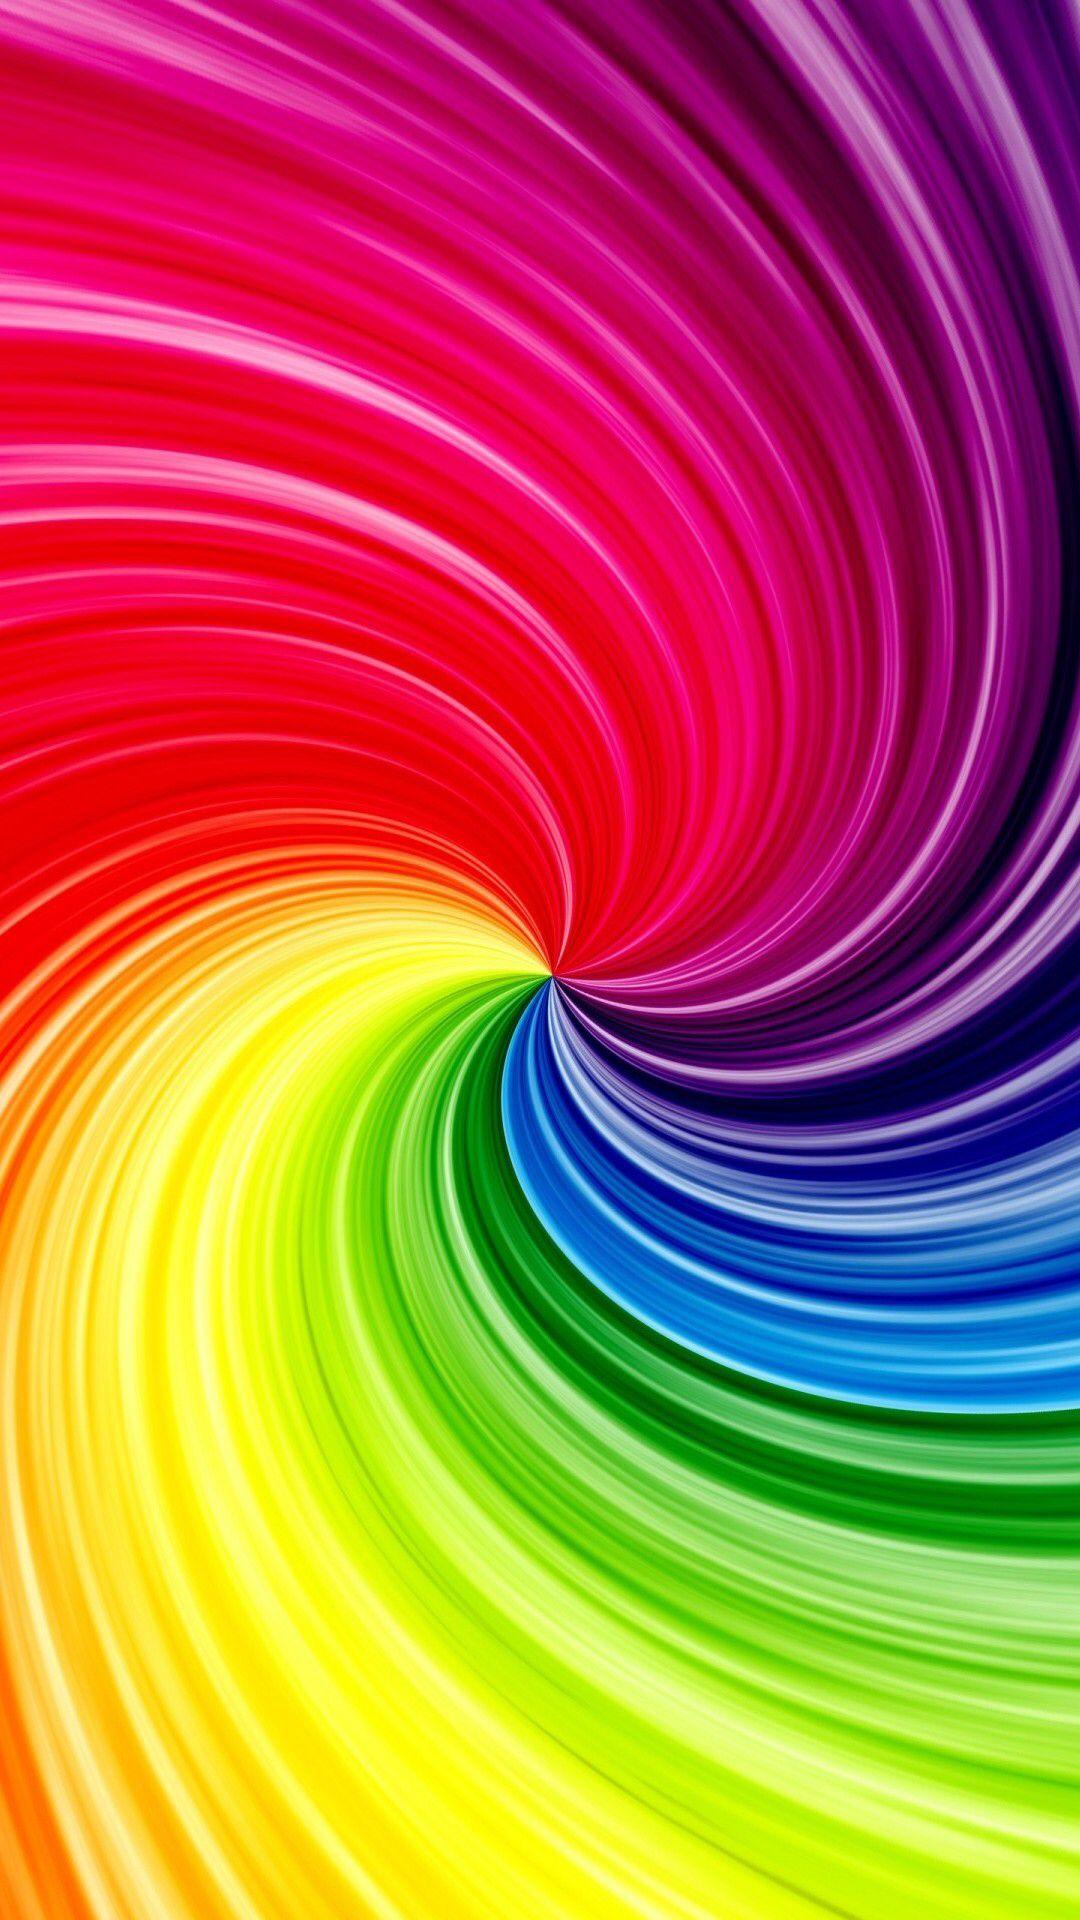 Abstract Colorful iPhone Wallpaper. Wallpaper iphone neon